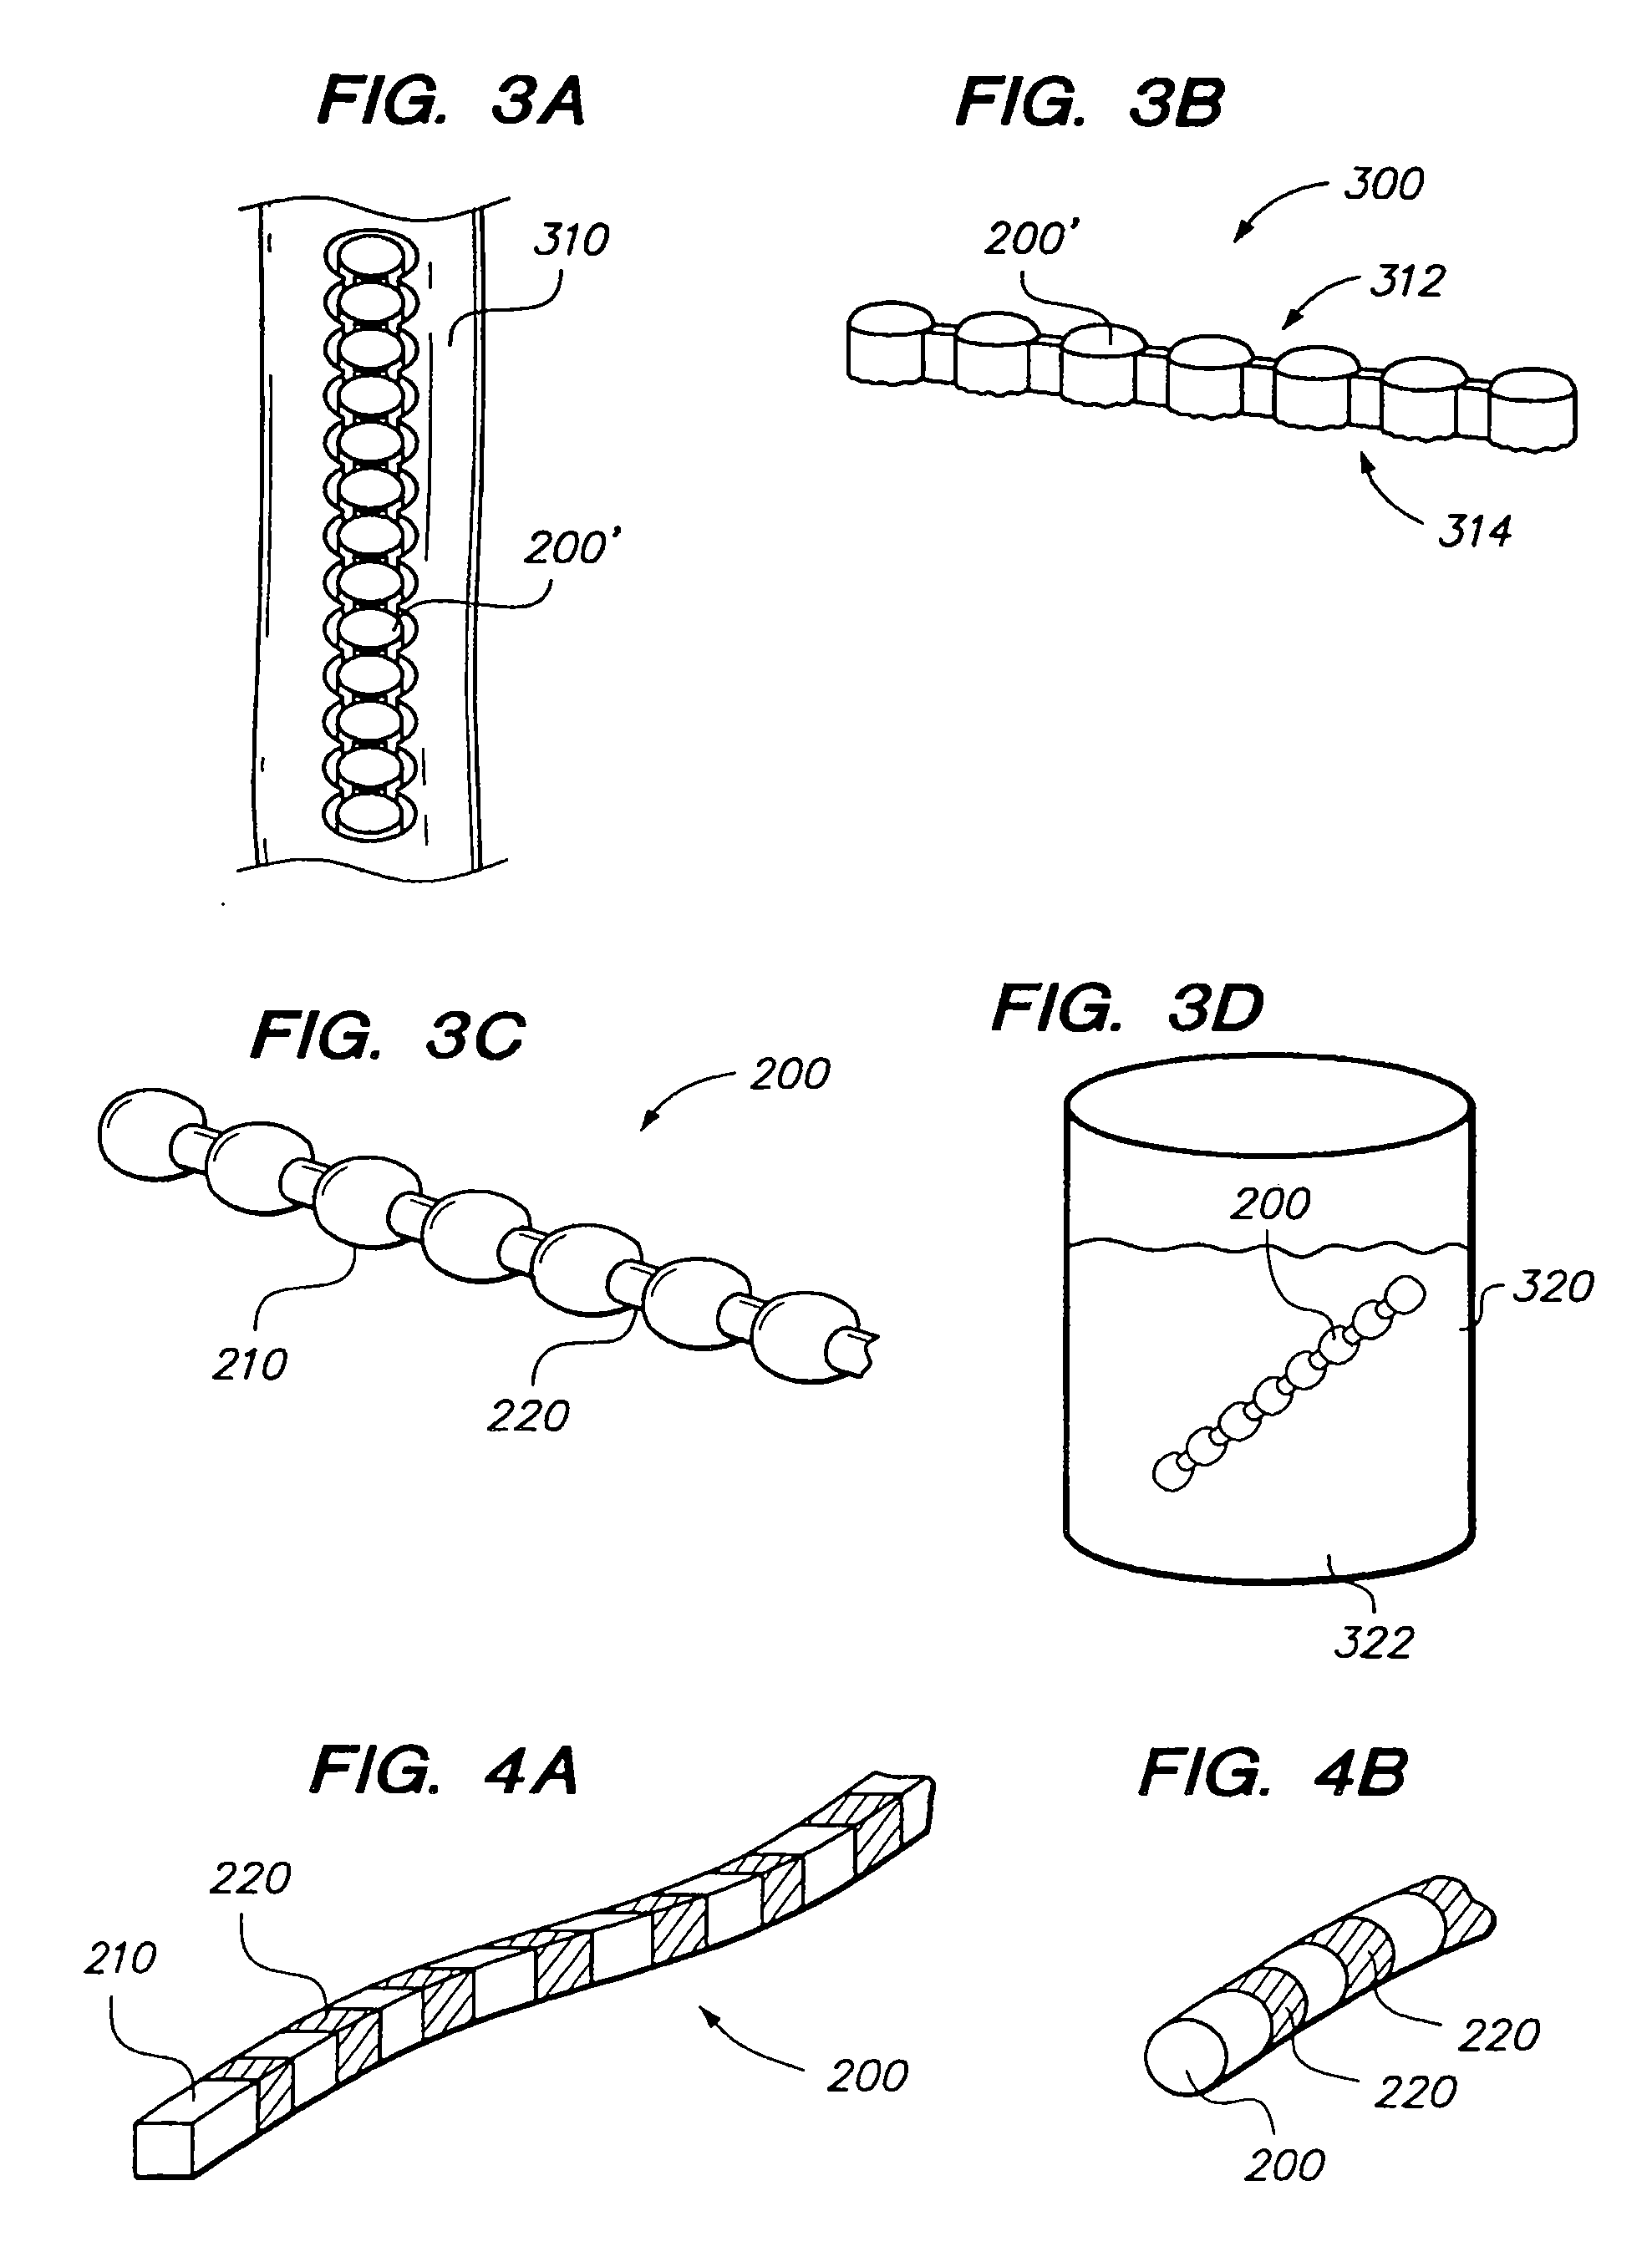 Flexible elongated chain implant and method of supporting body tissue with same